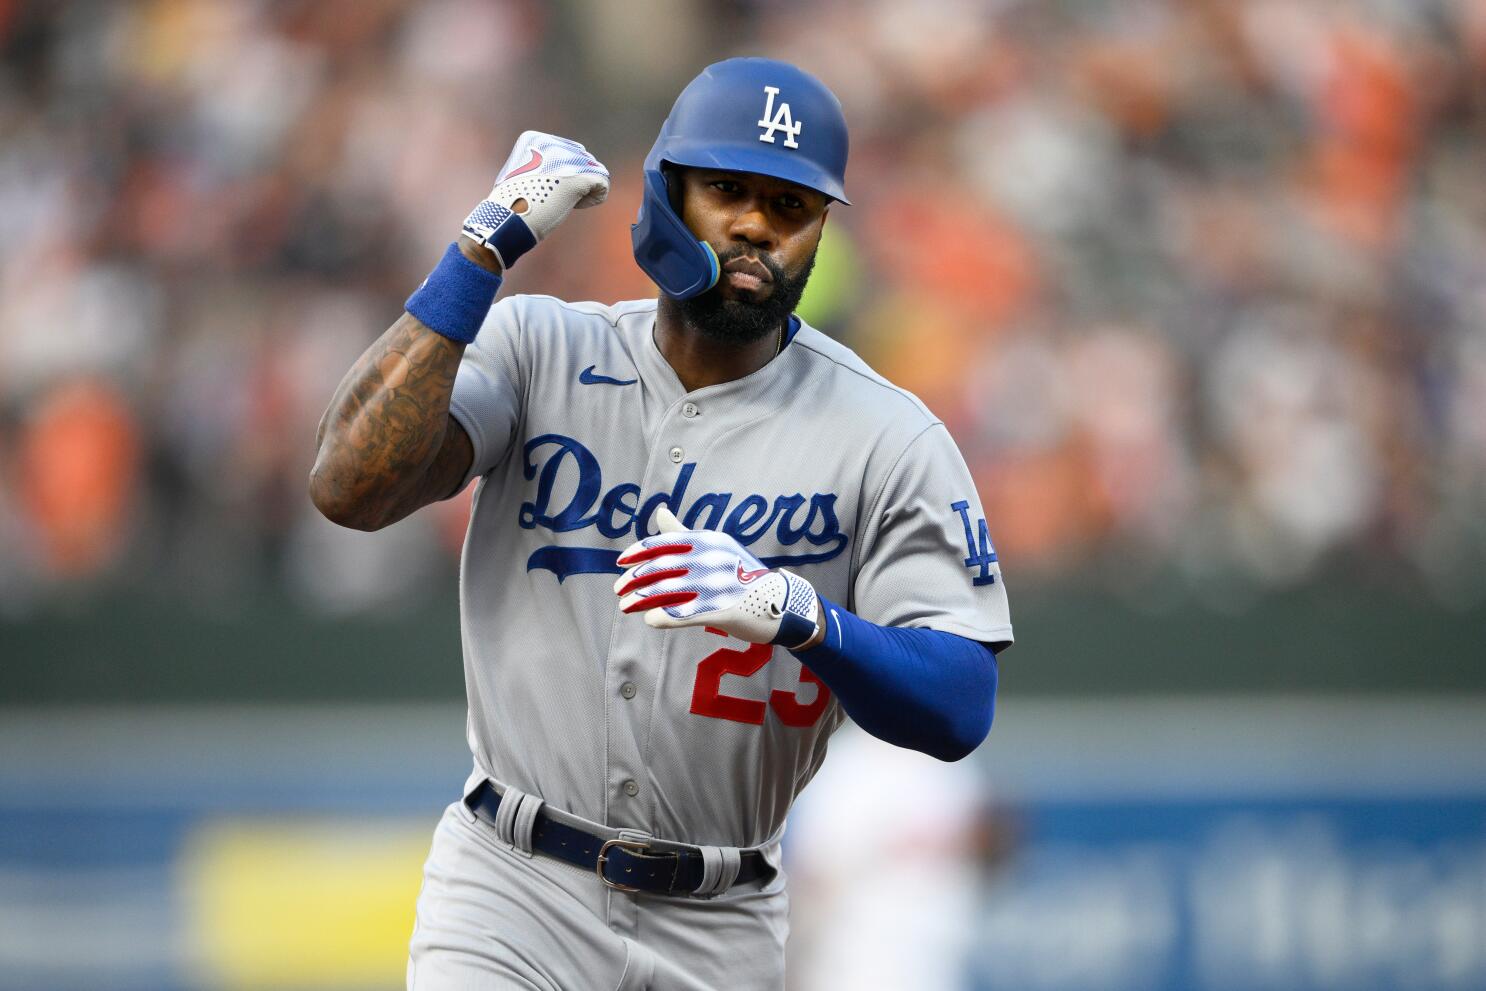 Jason Heyward has been a valuable offensive contributor in 2018